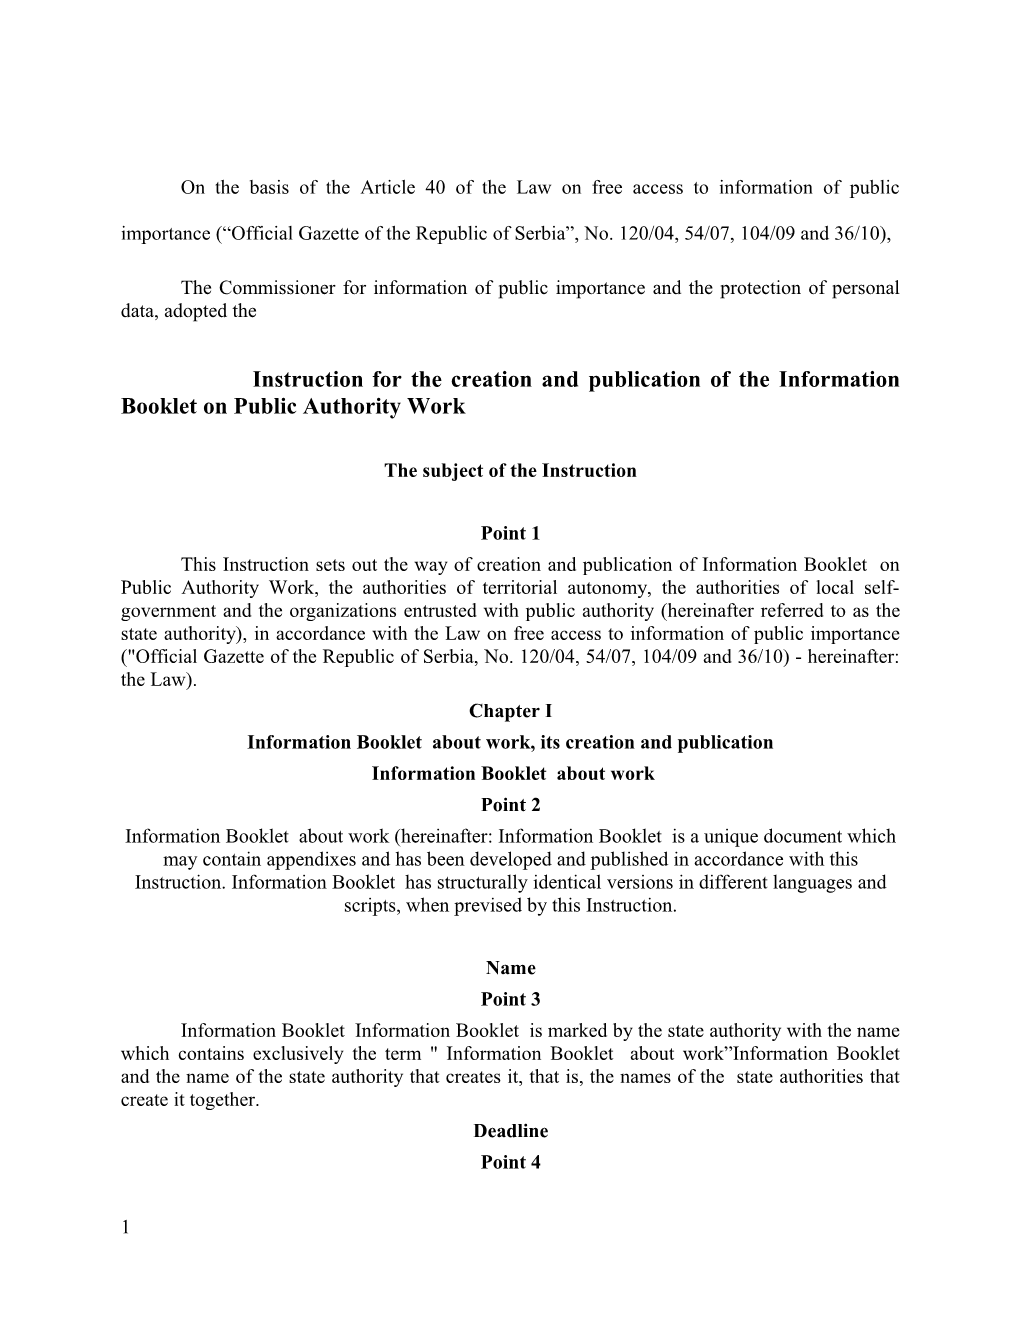 Instructionfor the Creation and Publication of the Information Booklet on Public Authority